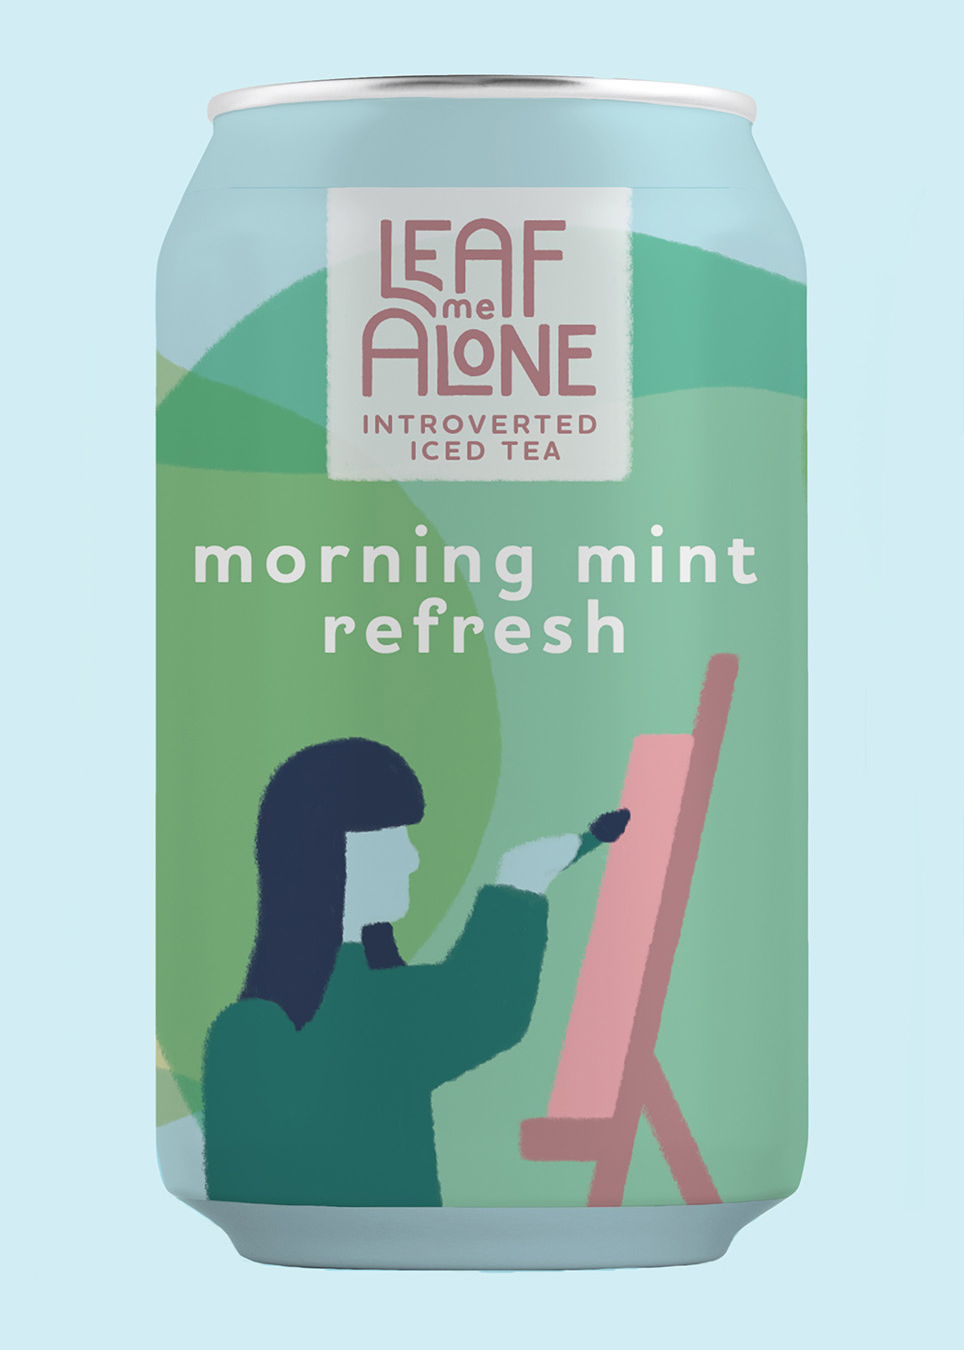 Mockup of an ice tea can from brand 'Leaf Me Alone'. The flavor is morning mint refresh and the can is illustrated with a figure painting on an easle.